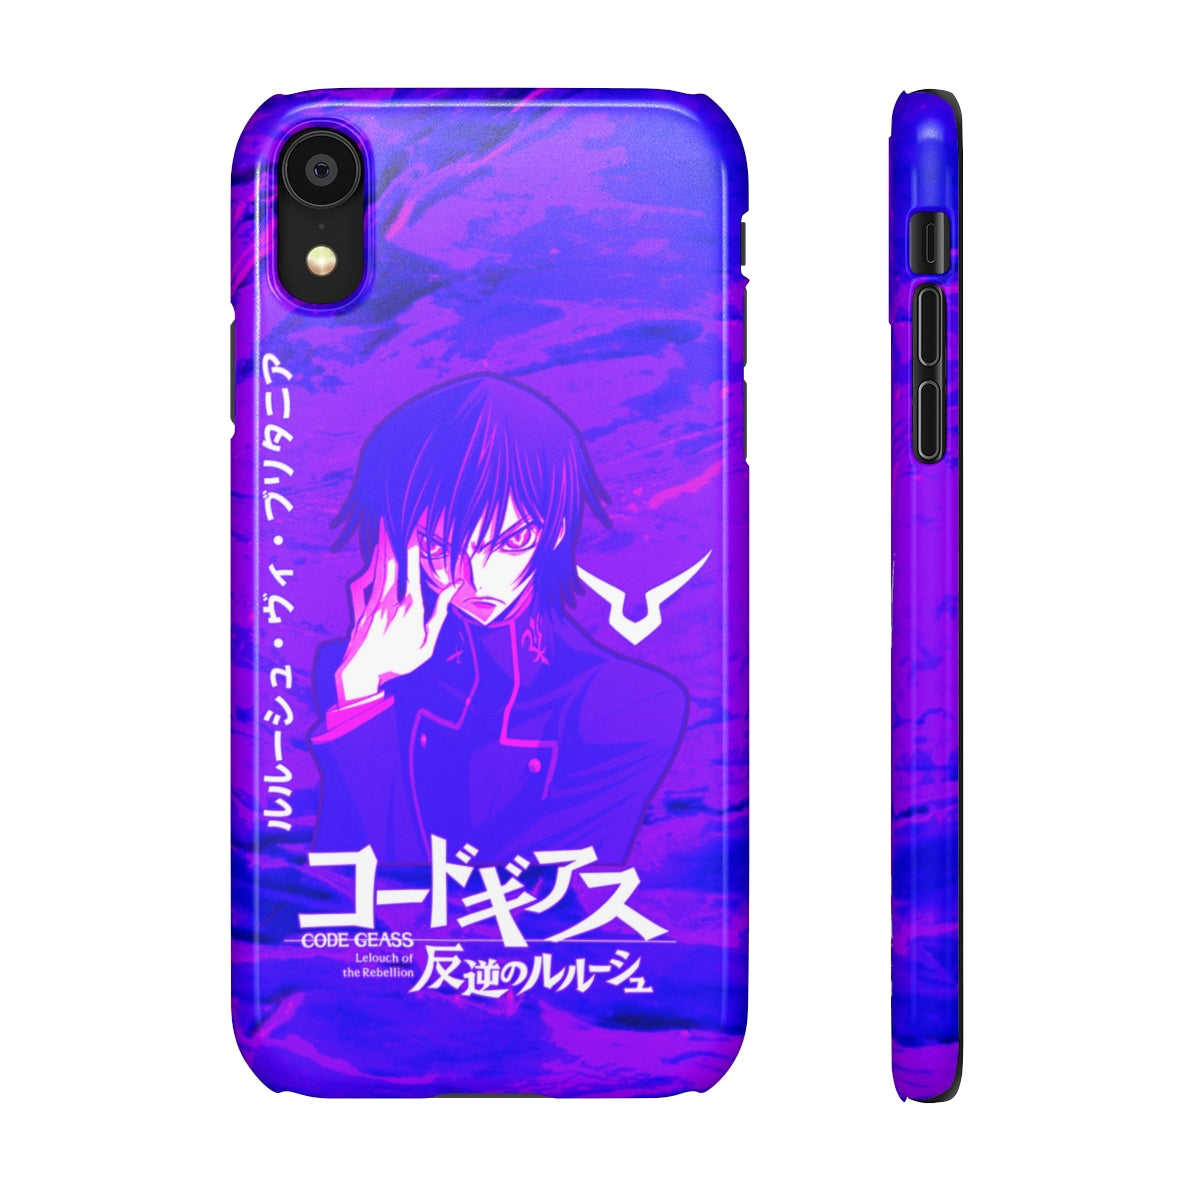 Lelouch iPhone Snap Case